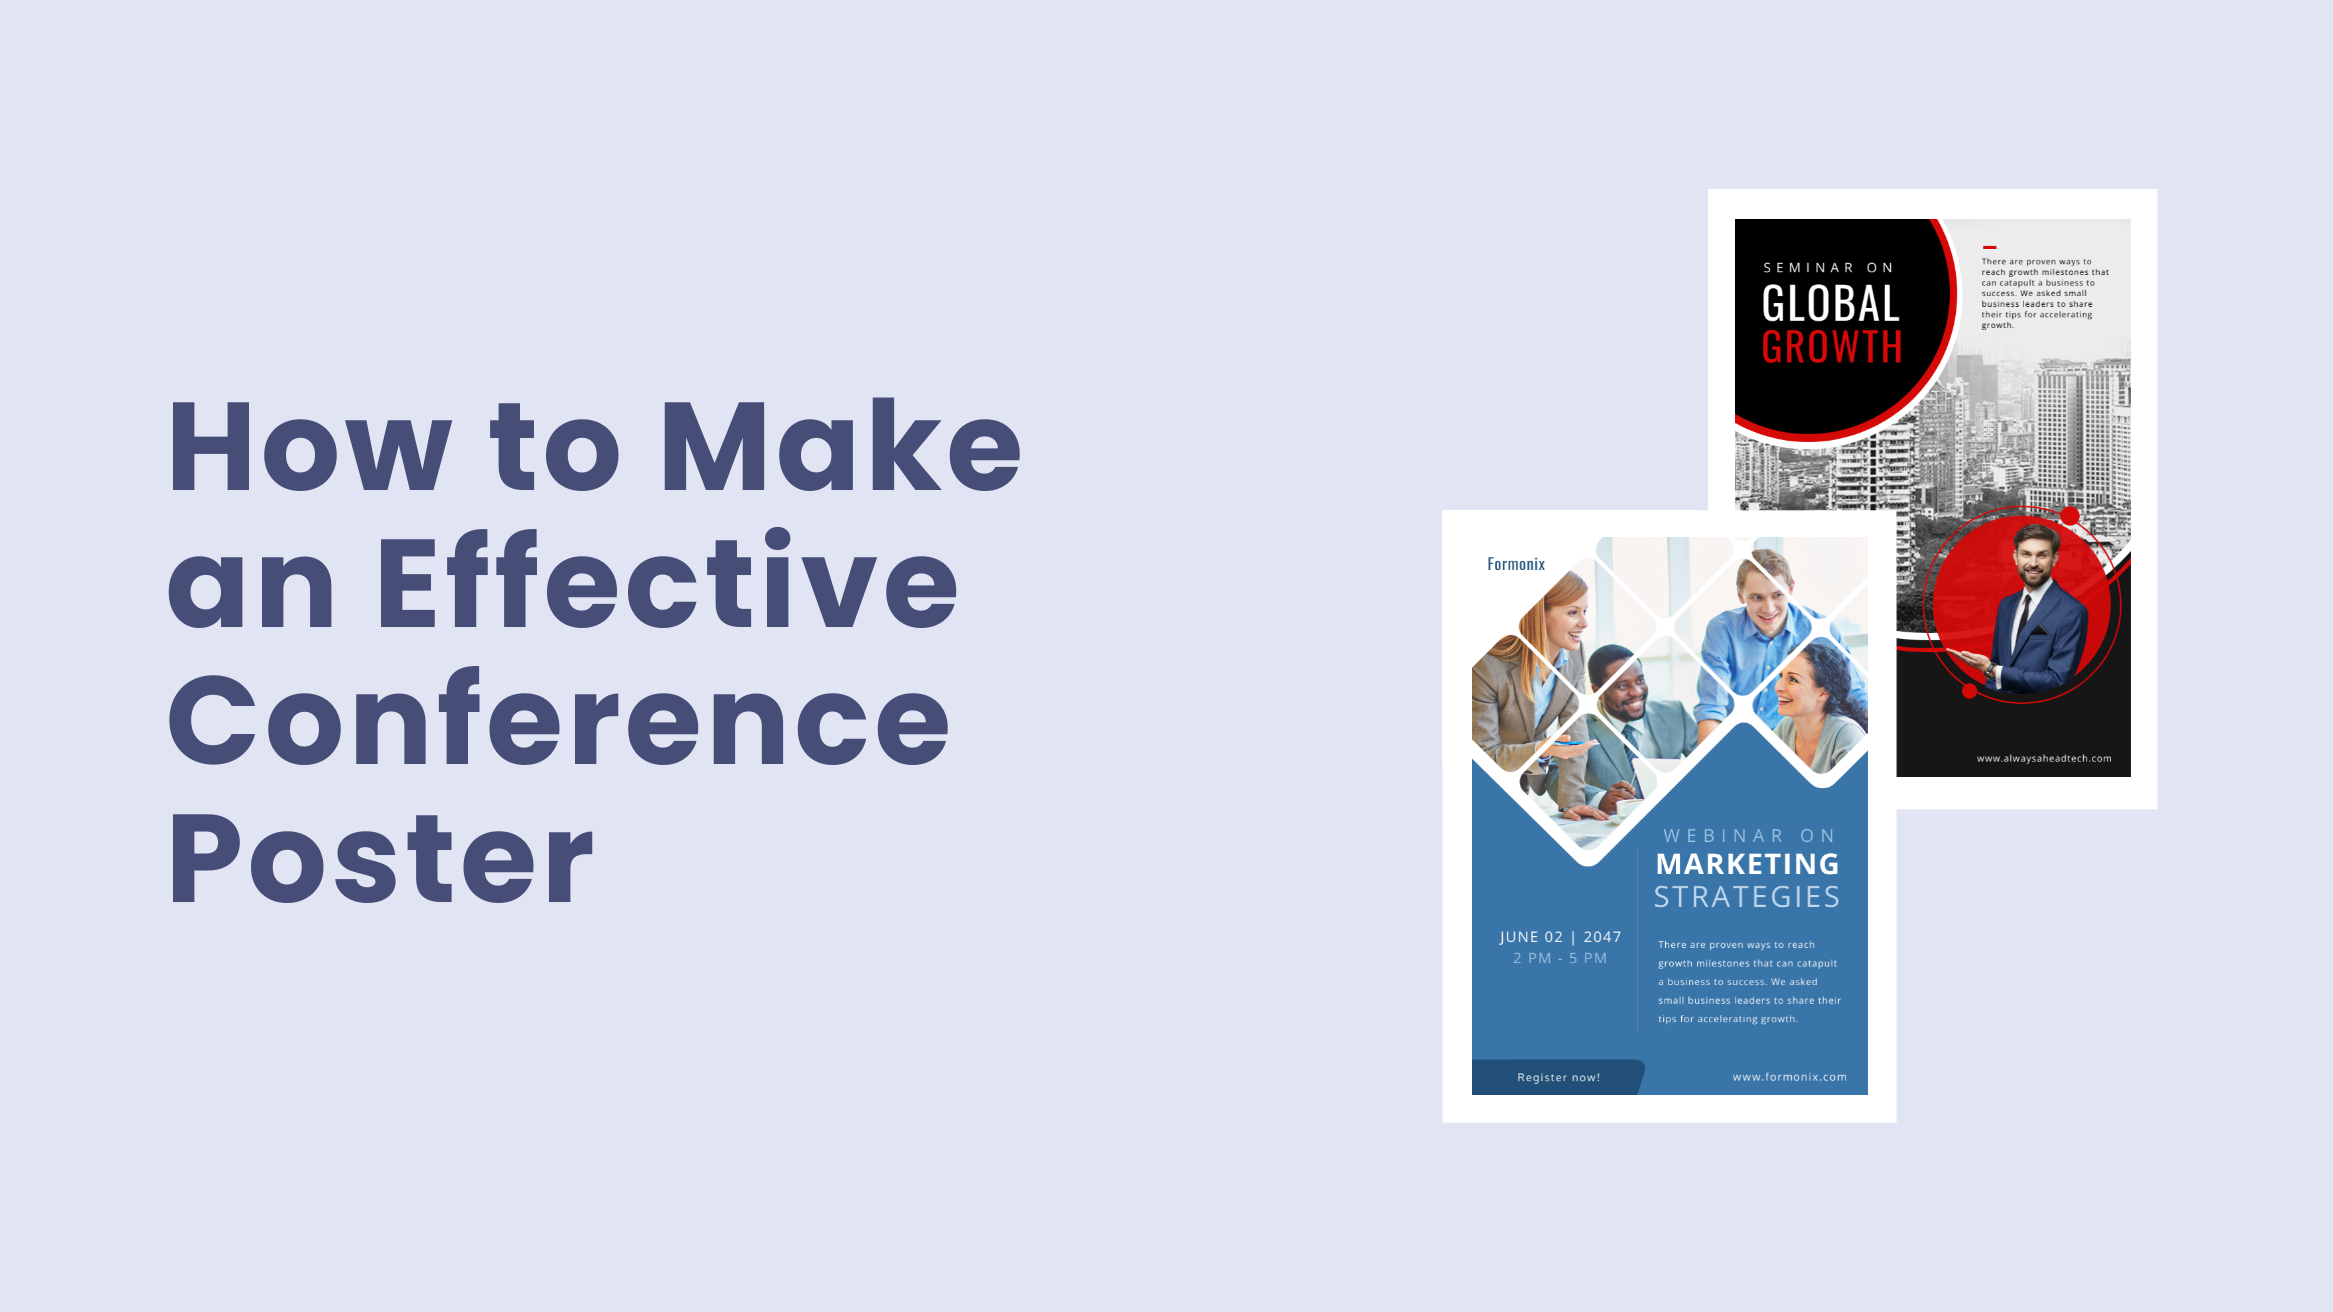 How to Make an Effective Conference Poster